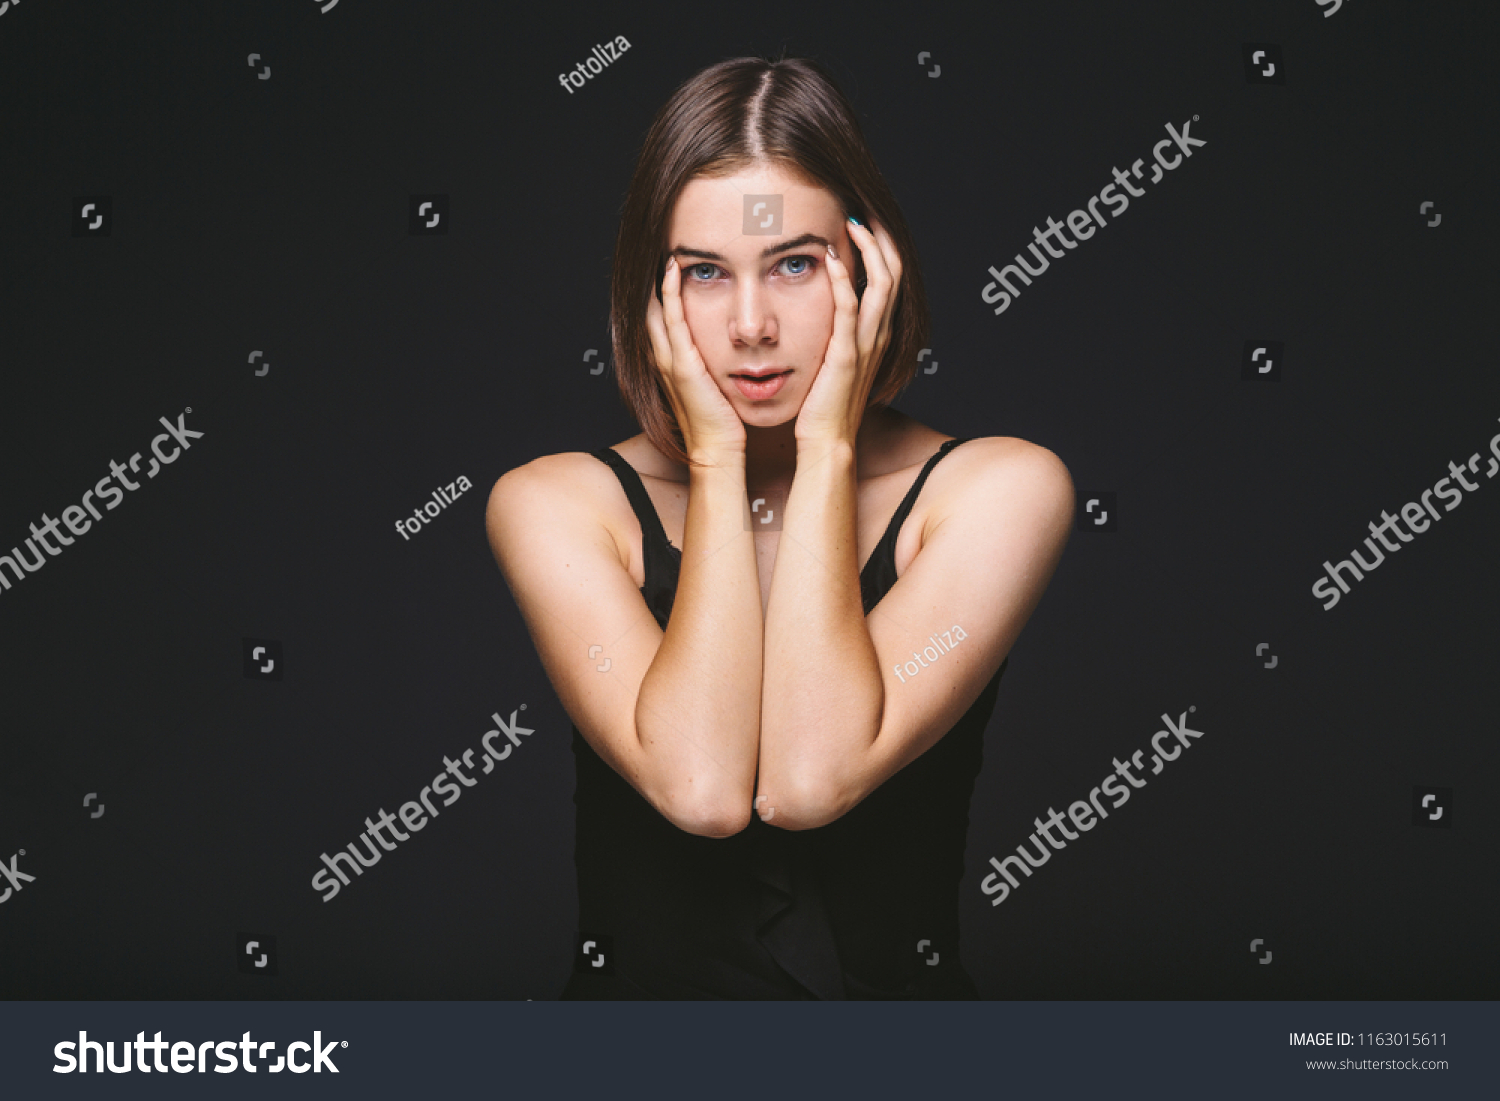 Portrait of a beautiful young Caucasian Caucasian woman 20 years old model with blue eyes natural make-up of hair on shoulder dancing hands posing on black isolated background in black lingerie. #1163015611